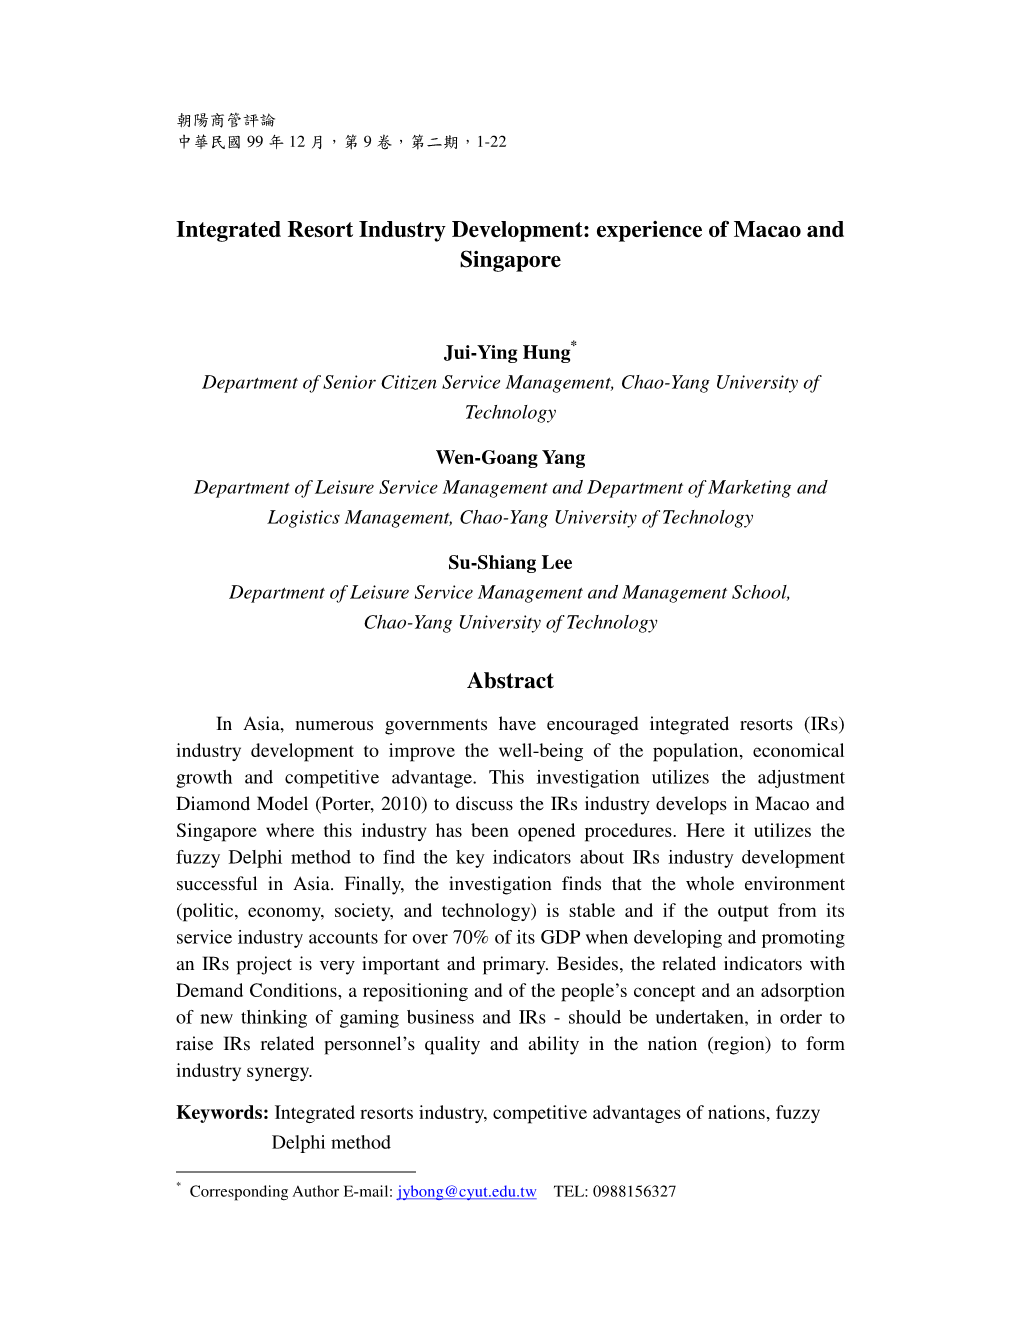 Integrated Resort Industry Development: Experience of Macao and Singapore